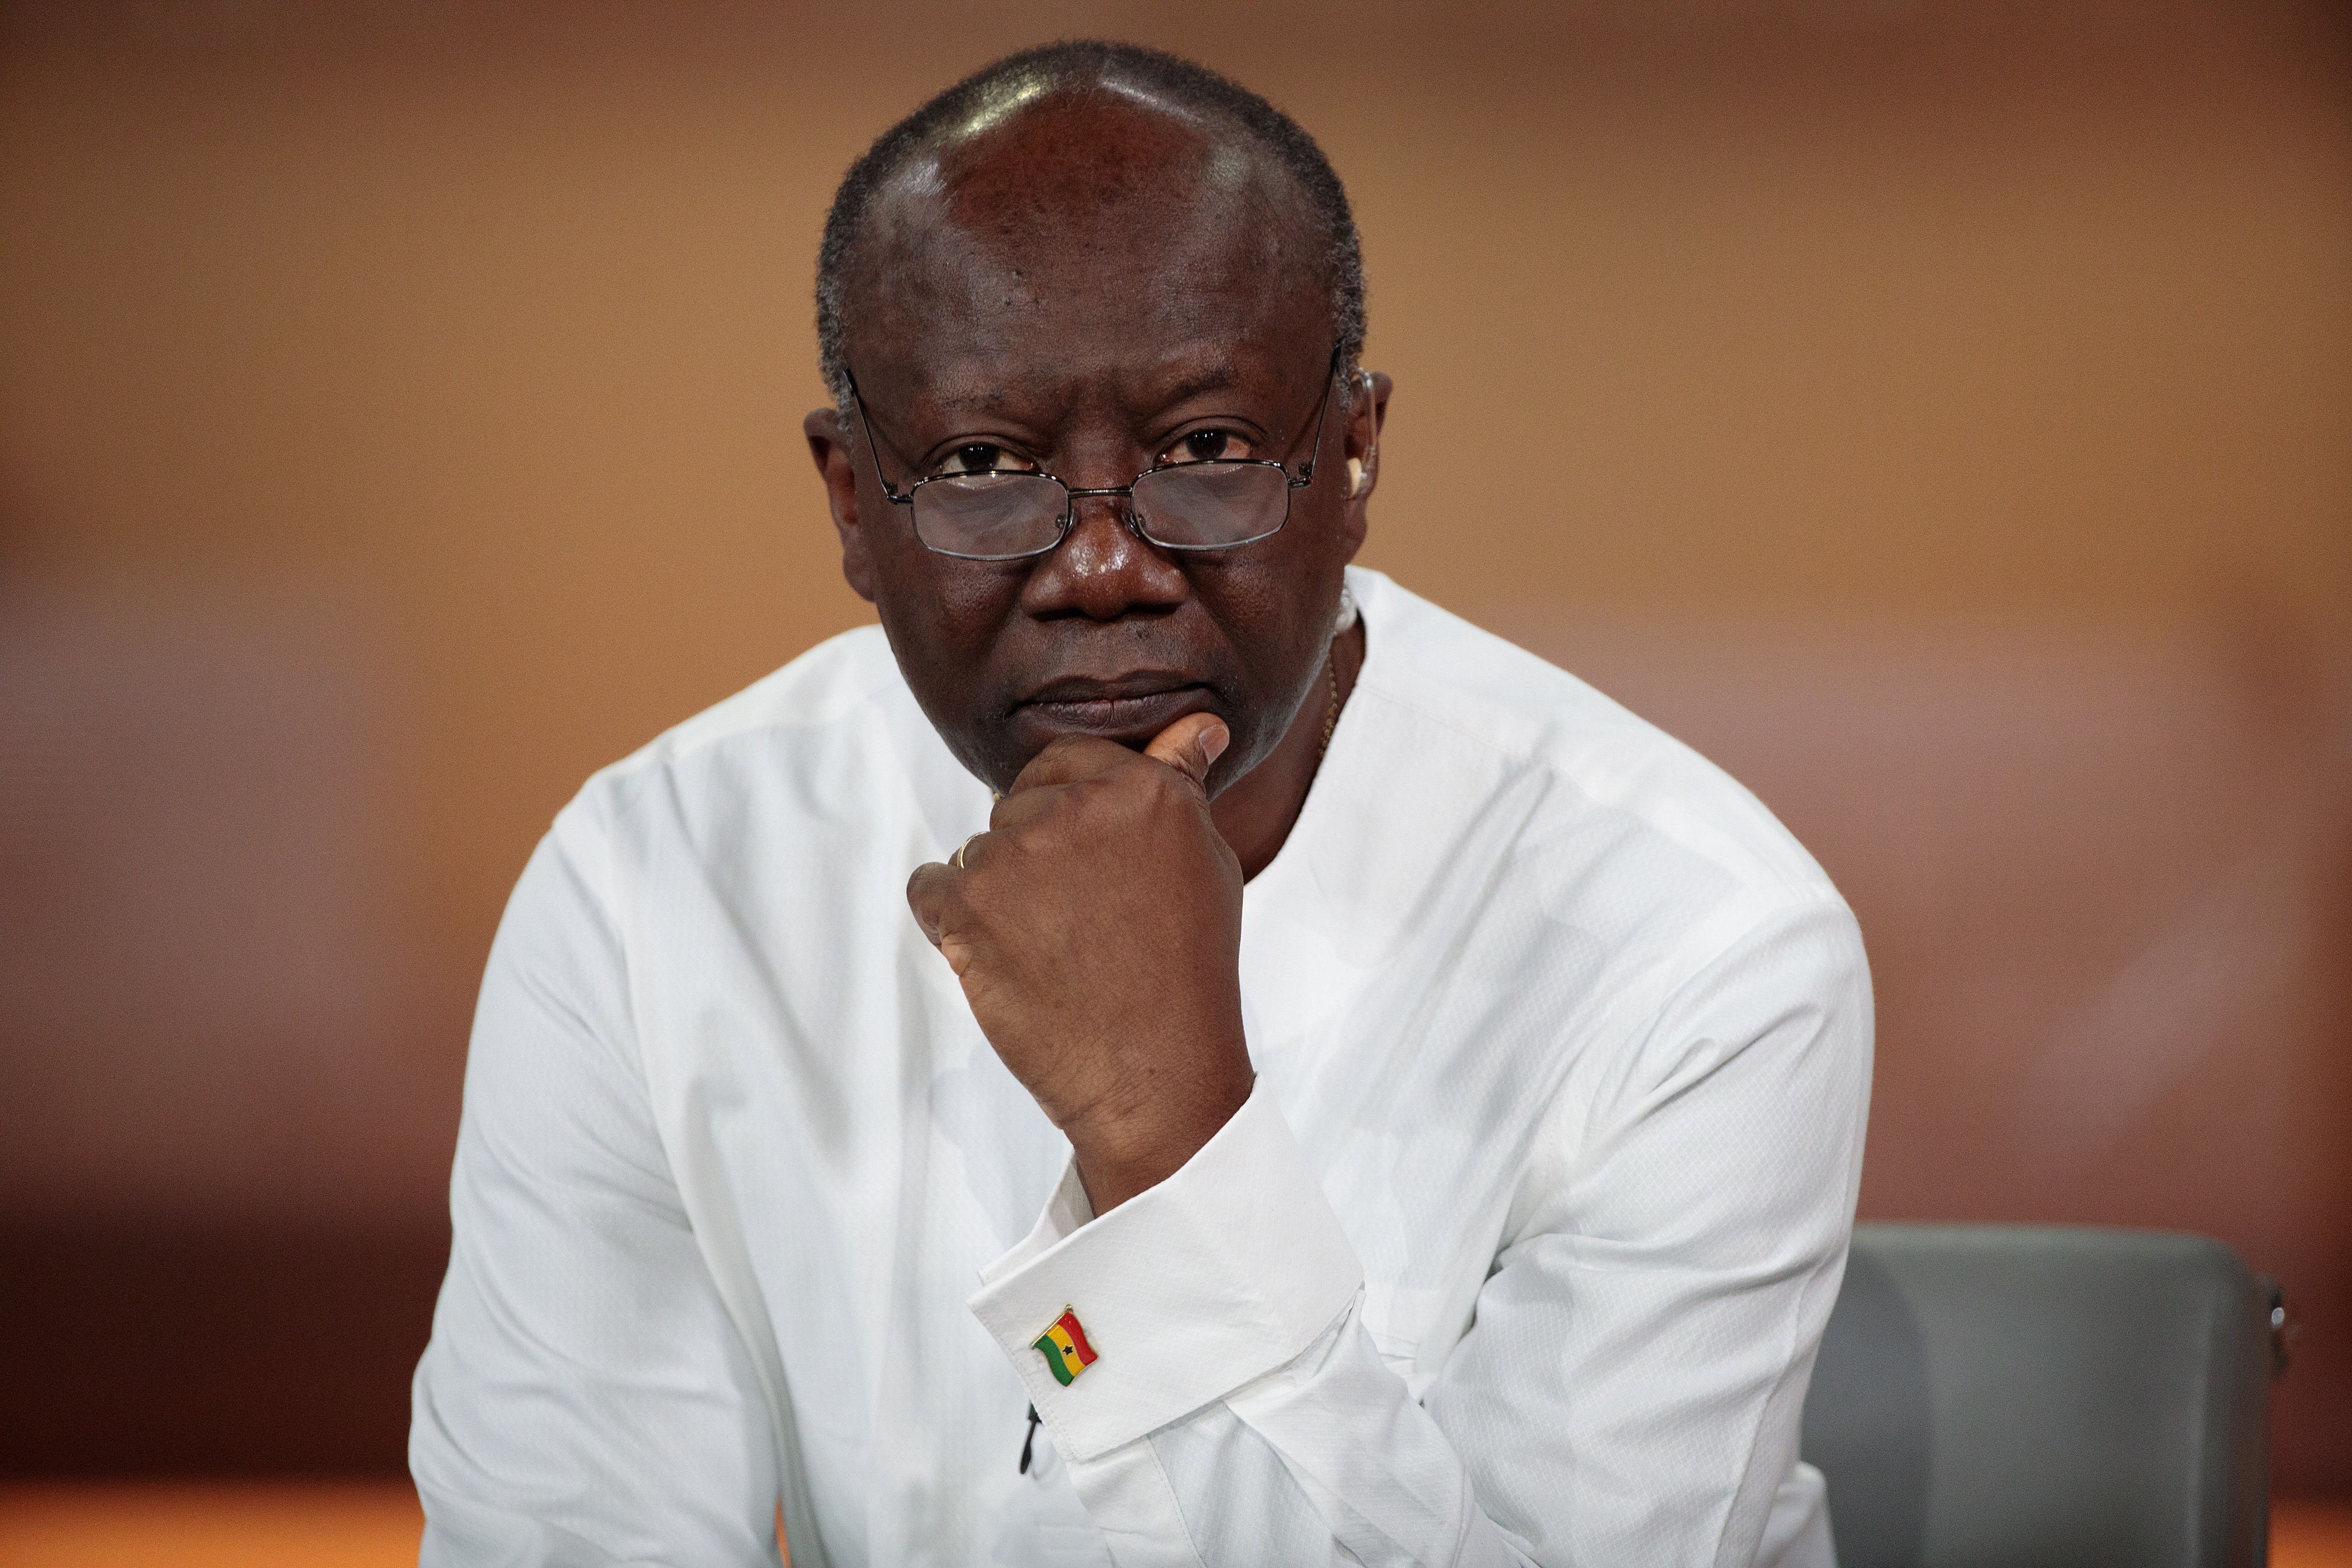 The Finance Minister, Ken Ofori-Atta, has announced a 2.5% increment in the VAT rate to support roads and the digitalization agenda